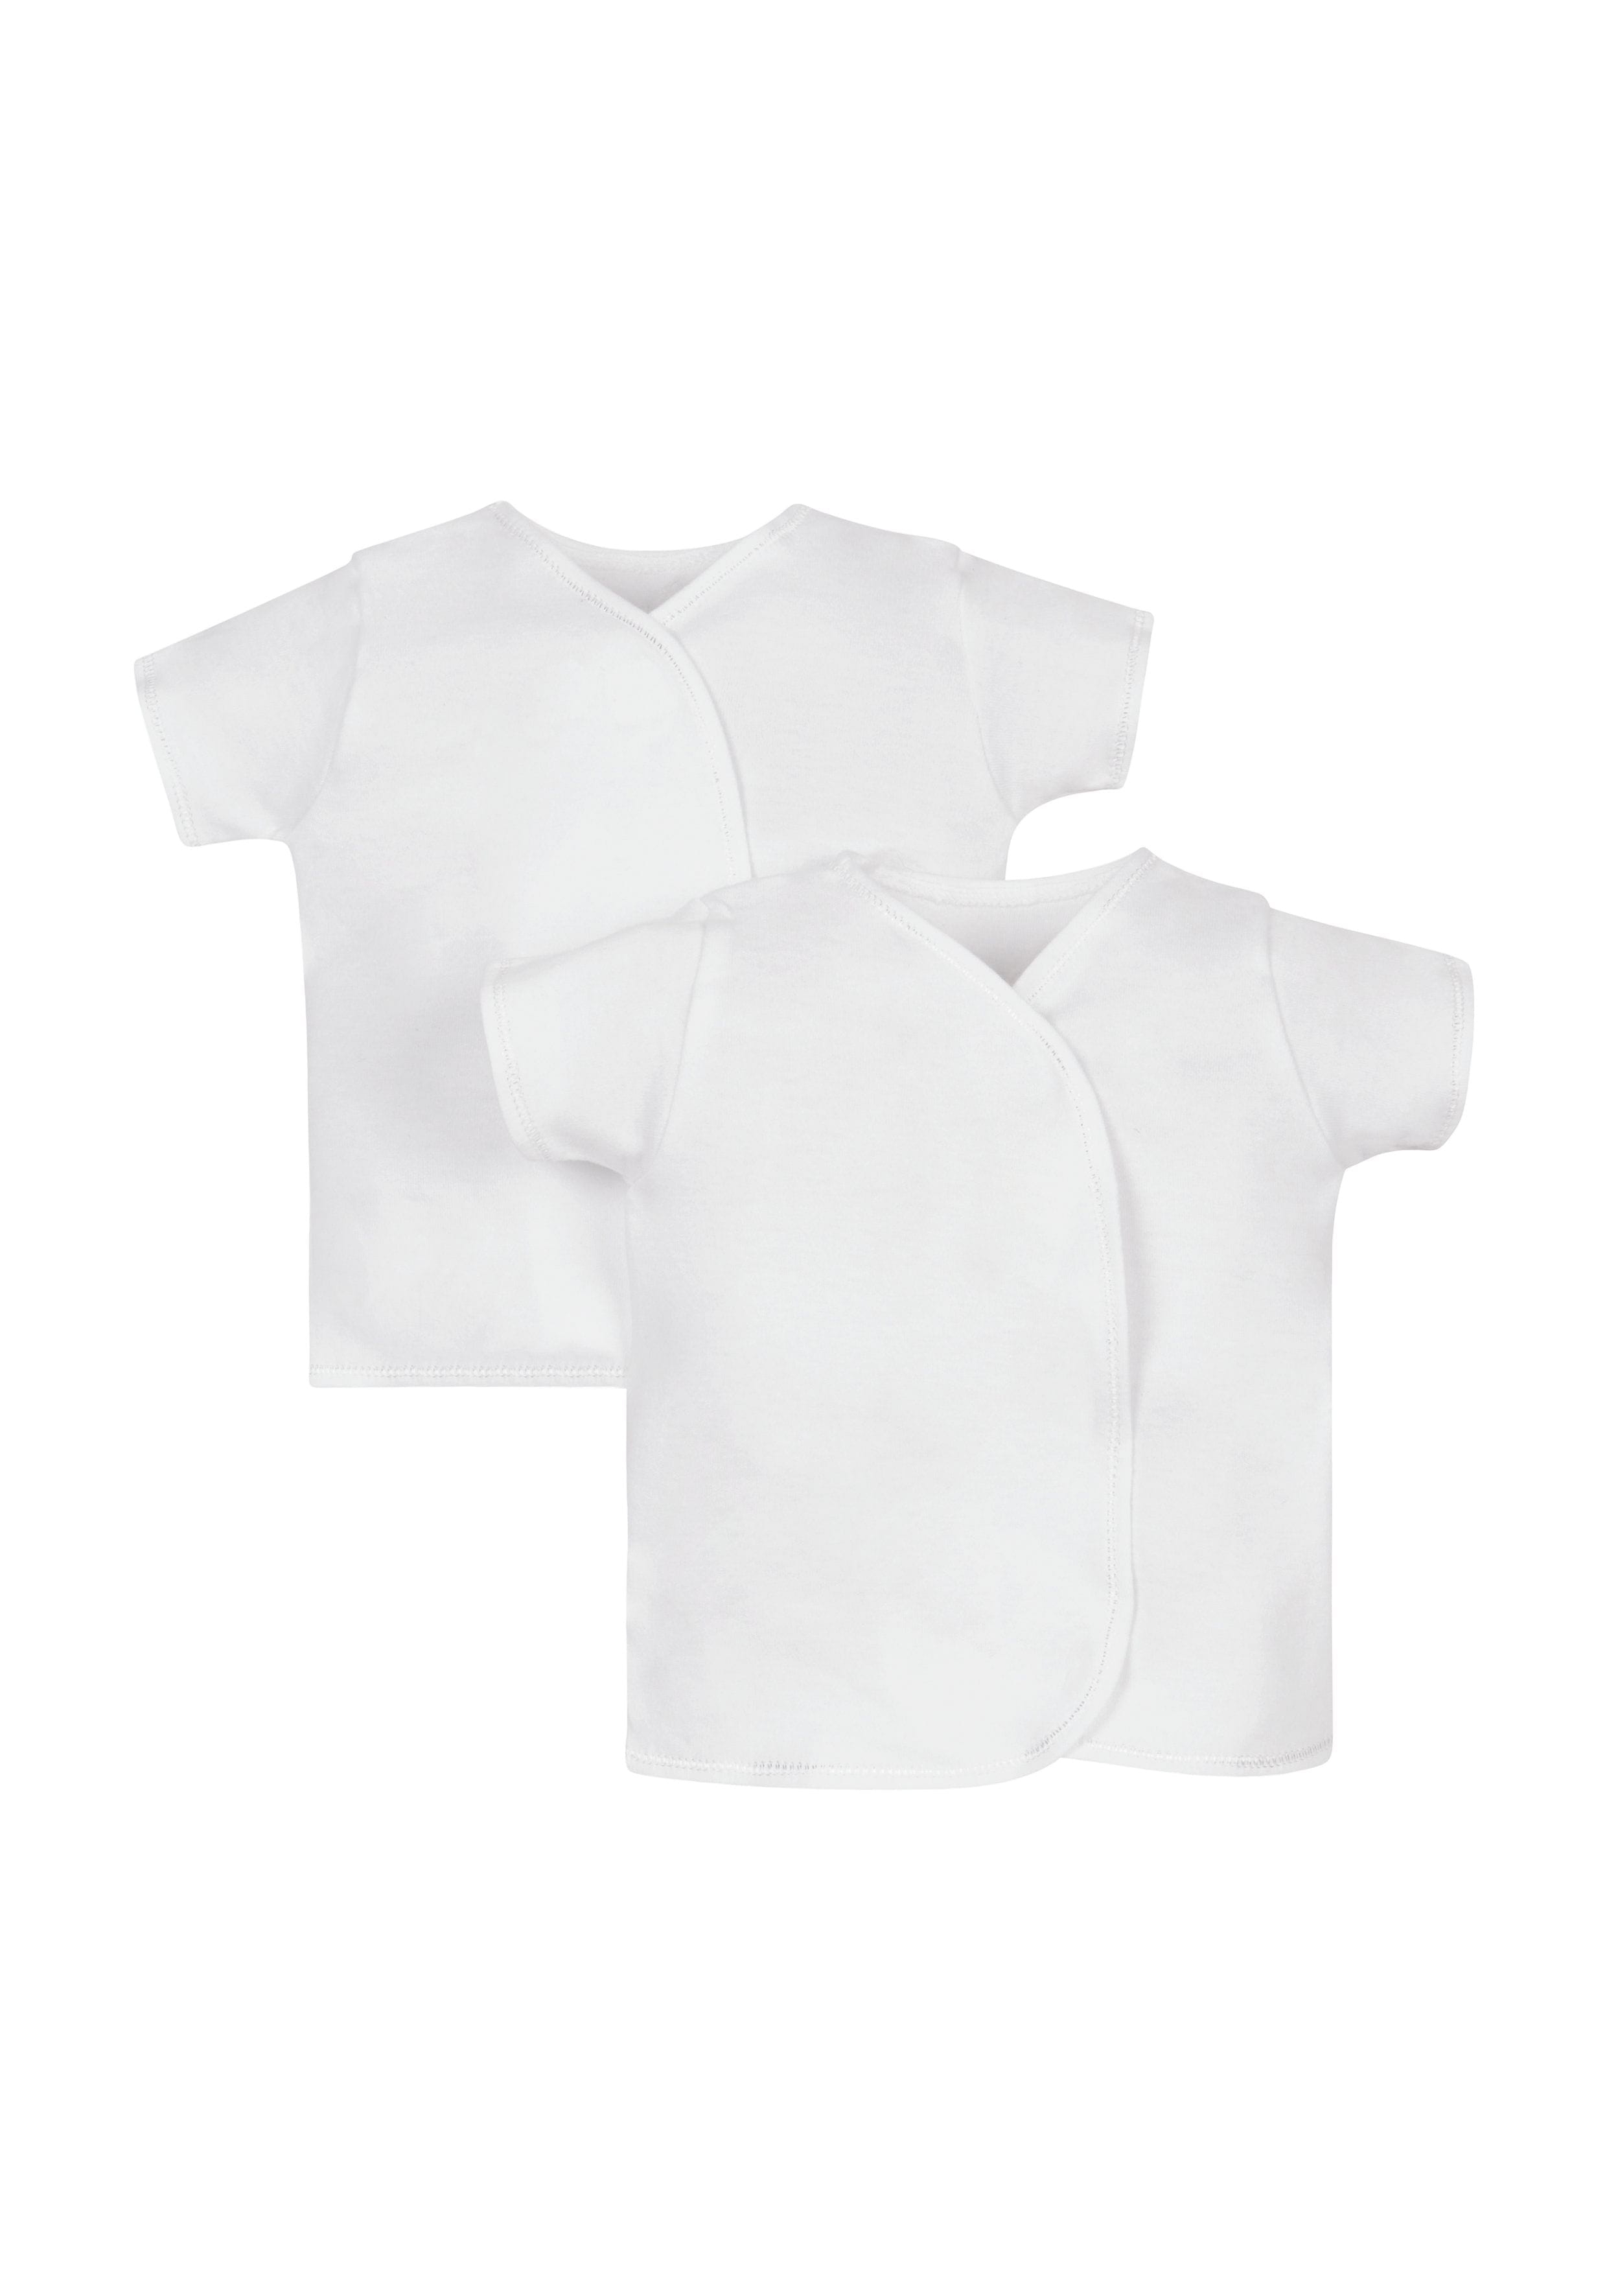 Mothercare | Unisex Half Sleeves Top - Pack Of 2 - White 0